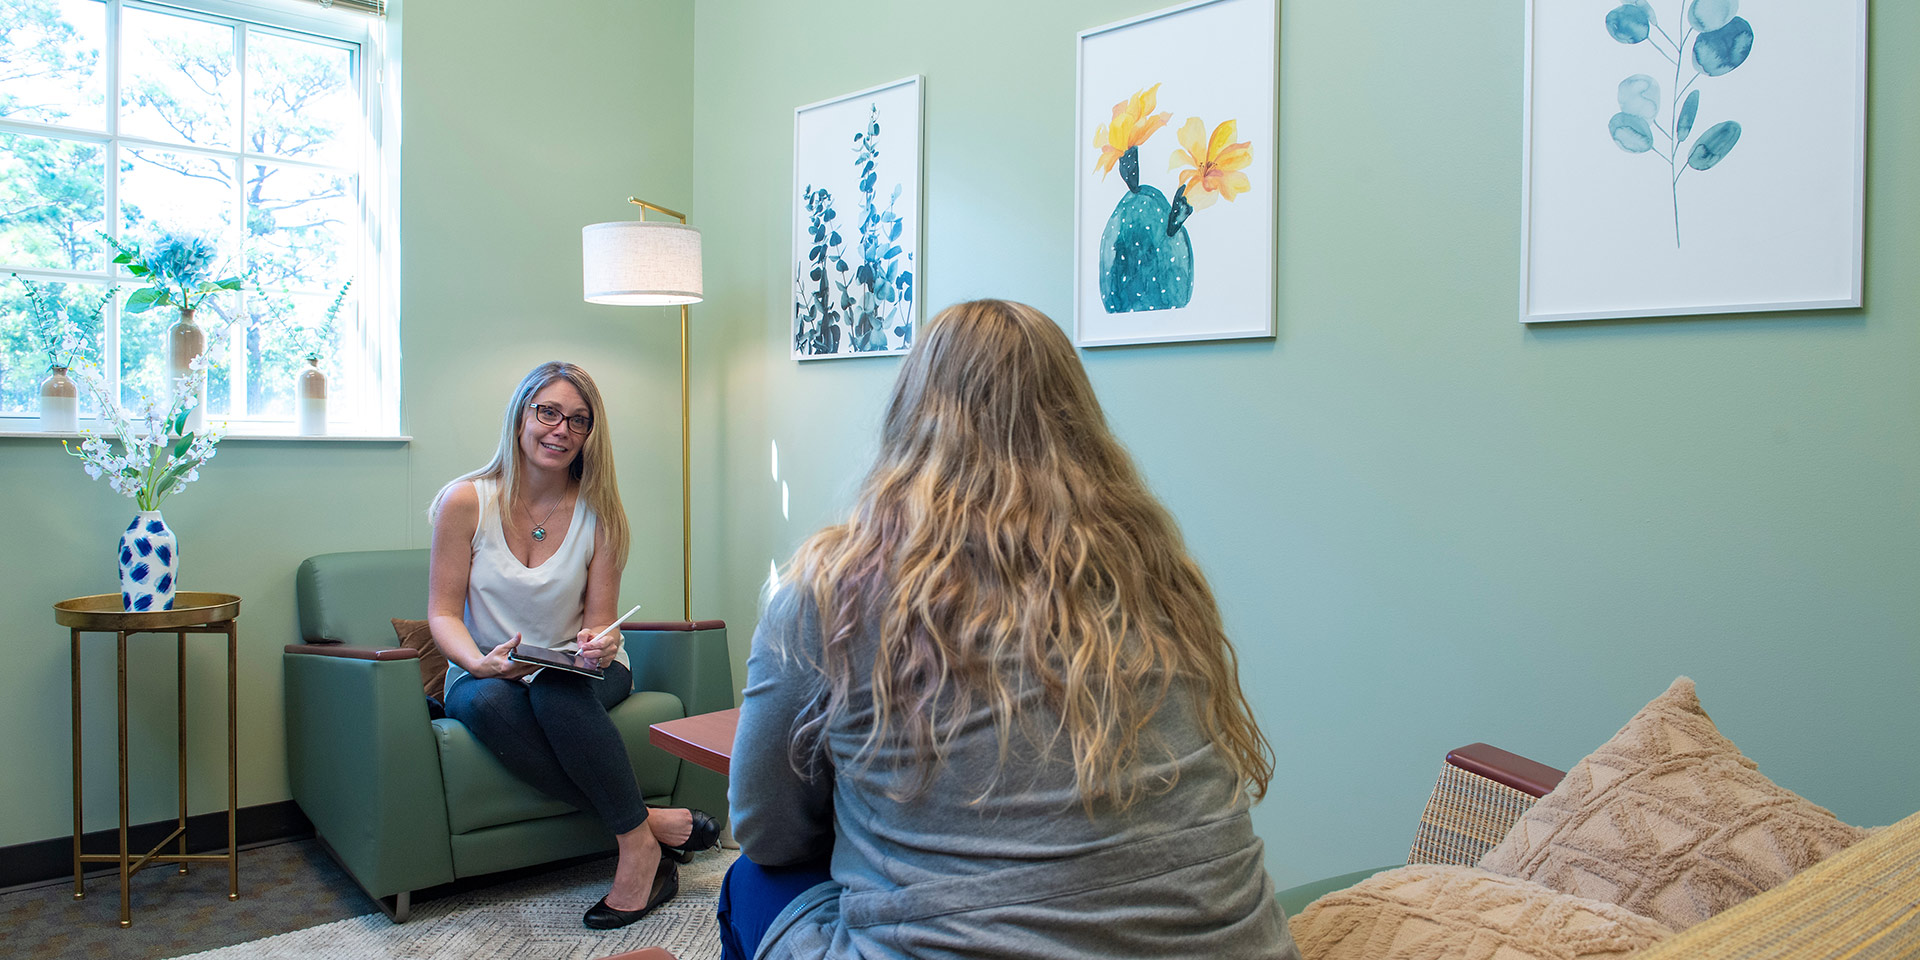 Two students participate in a mock therapy session